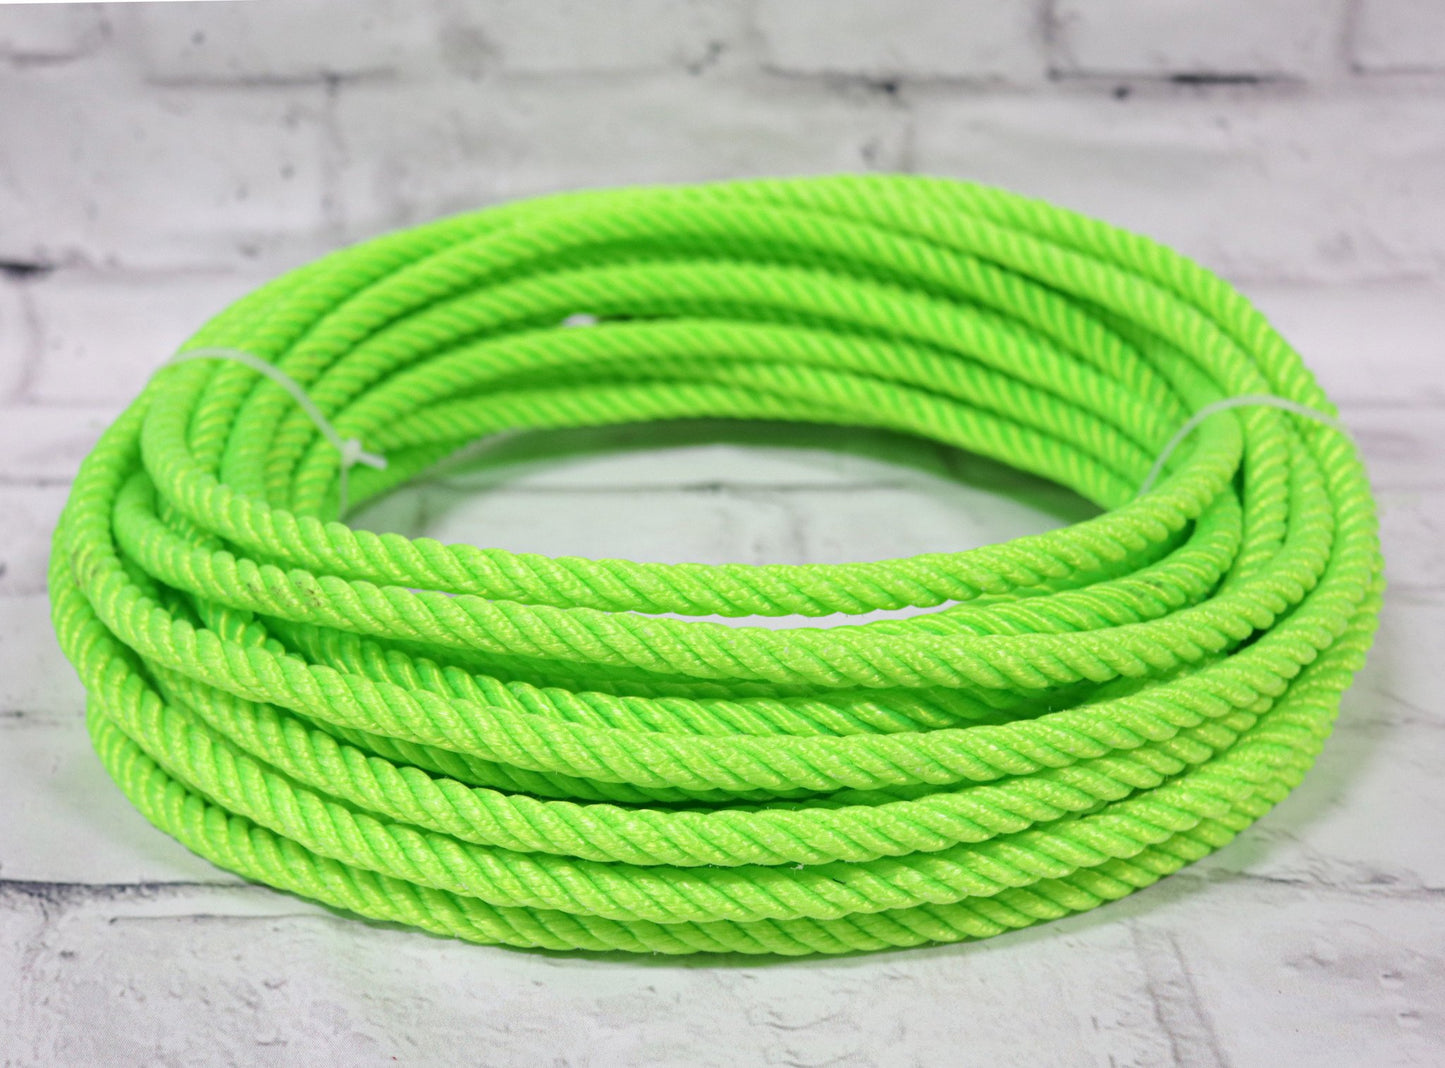 60Ft Lime Green 11mm Soga Para Florear Limon Trick Rope Green